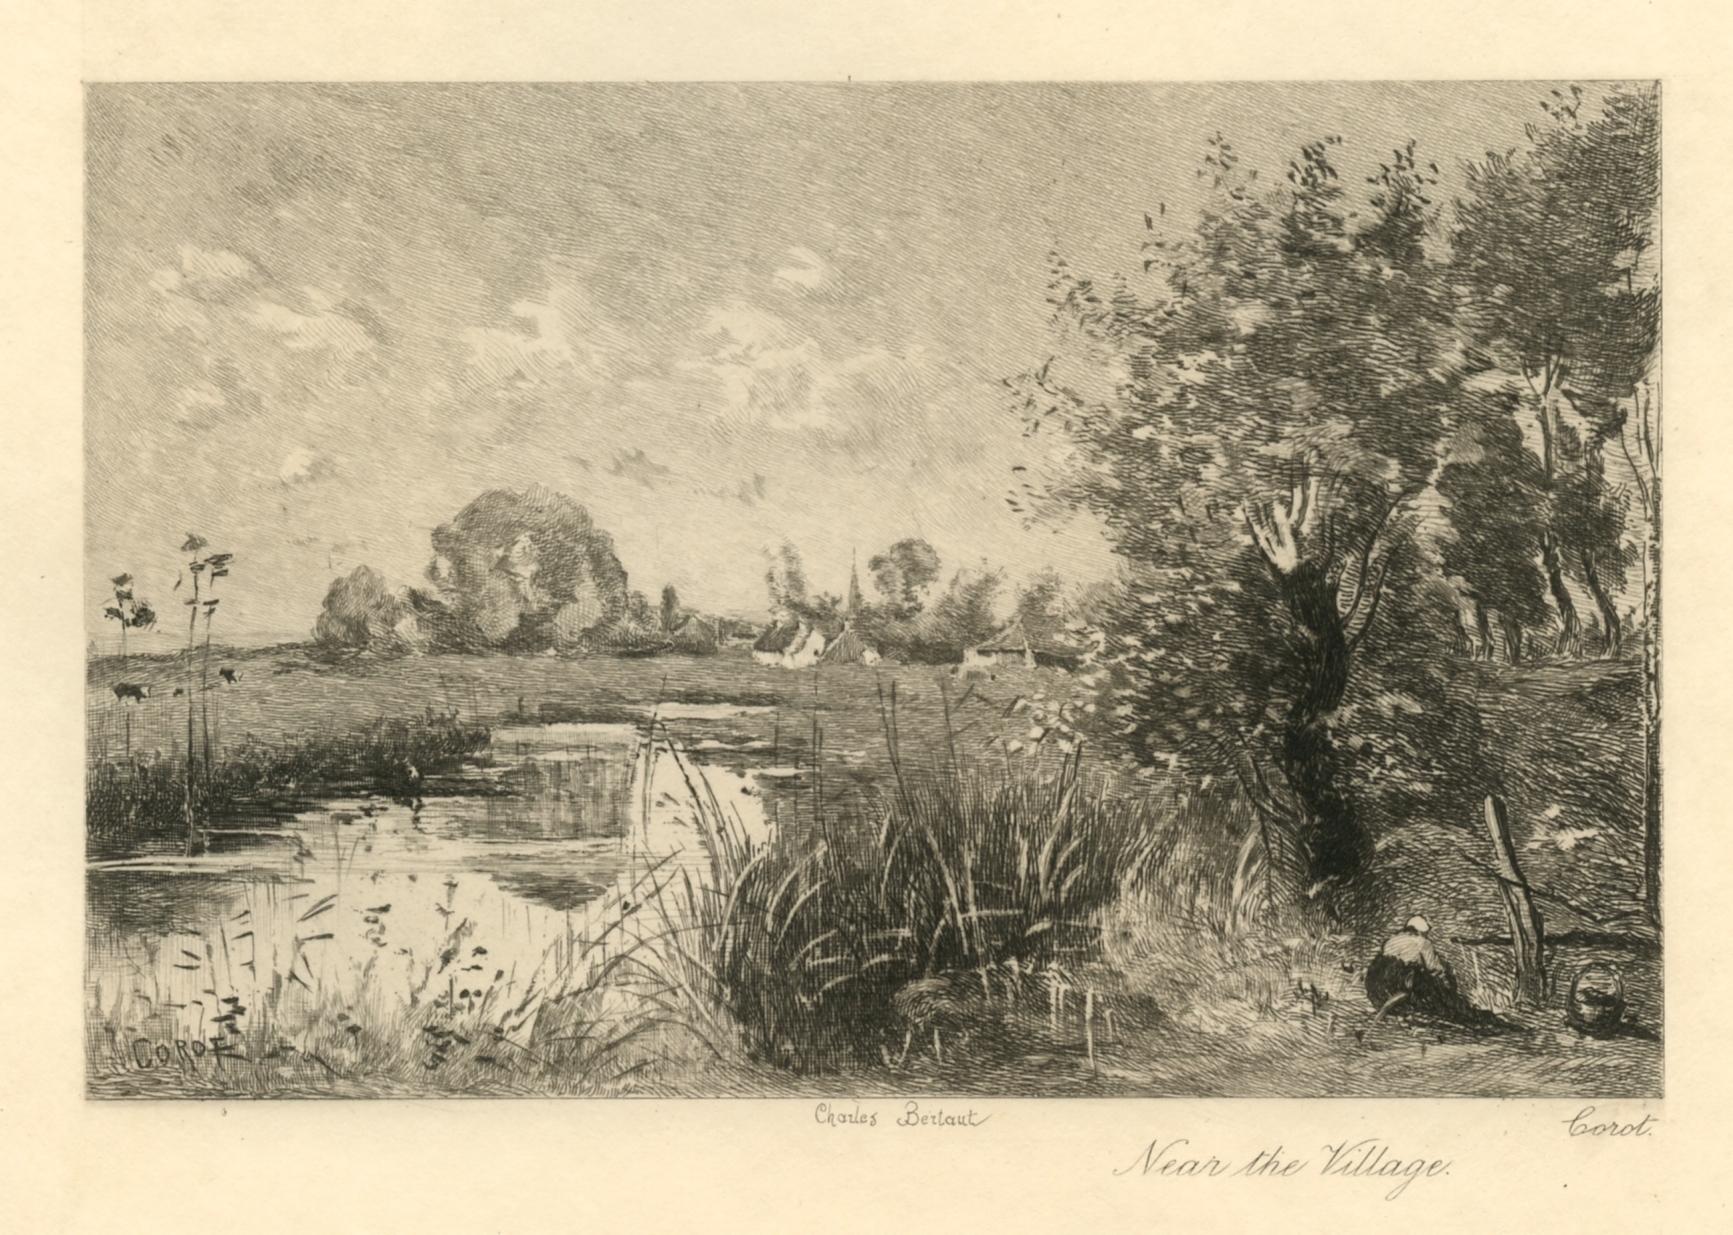 "Near the Village" etching - Print by (after) Jean-Baptiste-Camille Corot